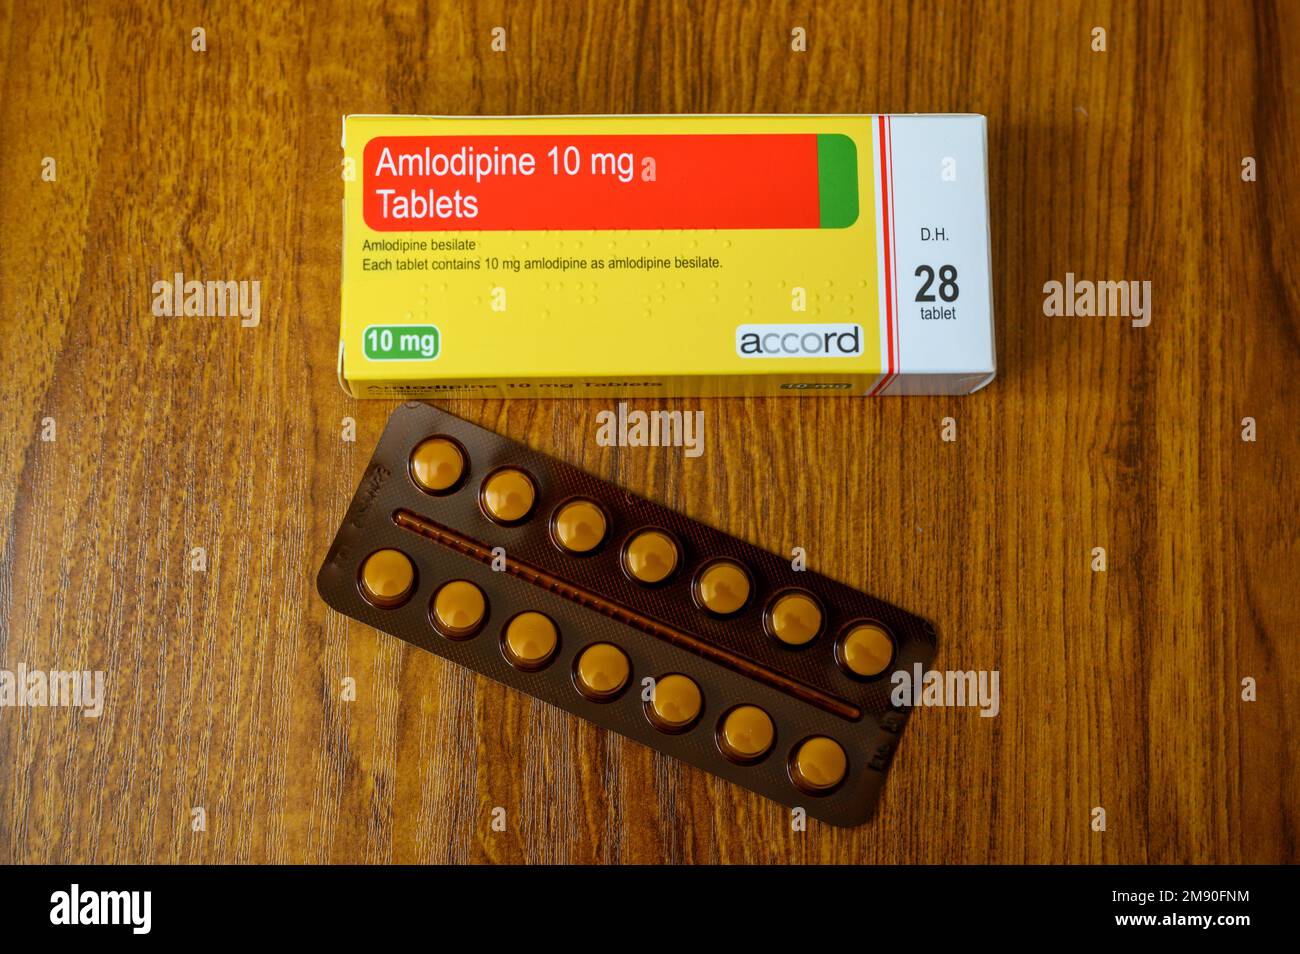 Amlodipine 10 mg tablets for the treatment of high blood pressure, hypertension Stock Photo